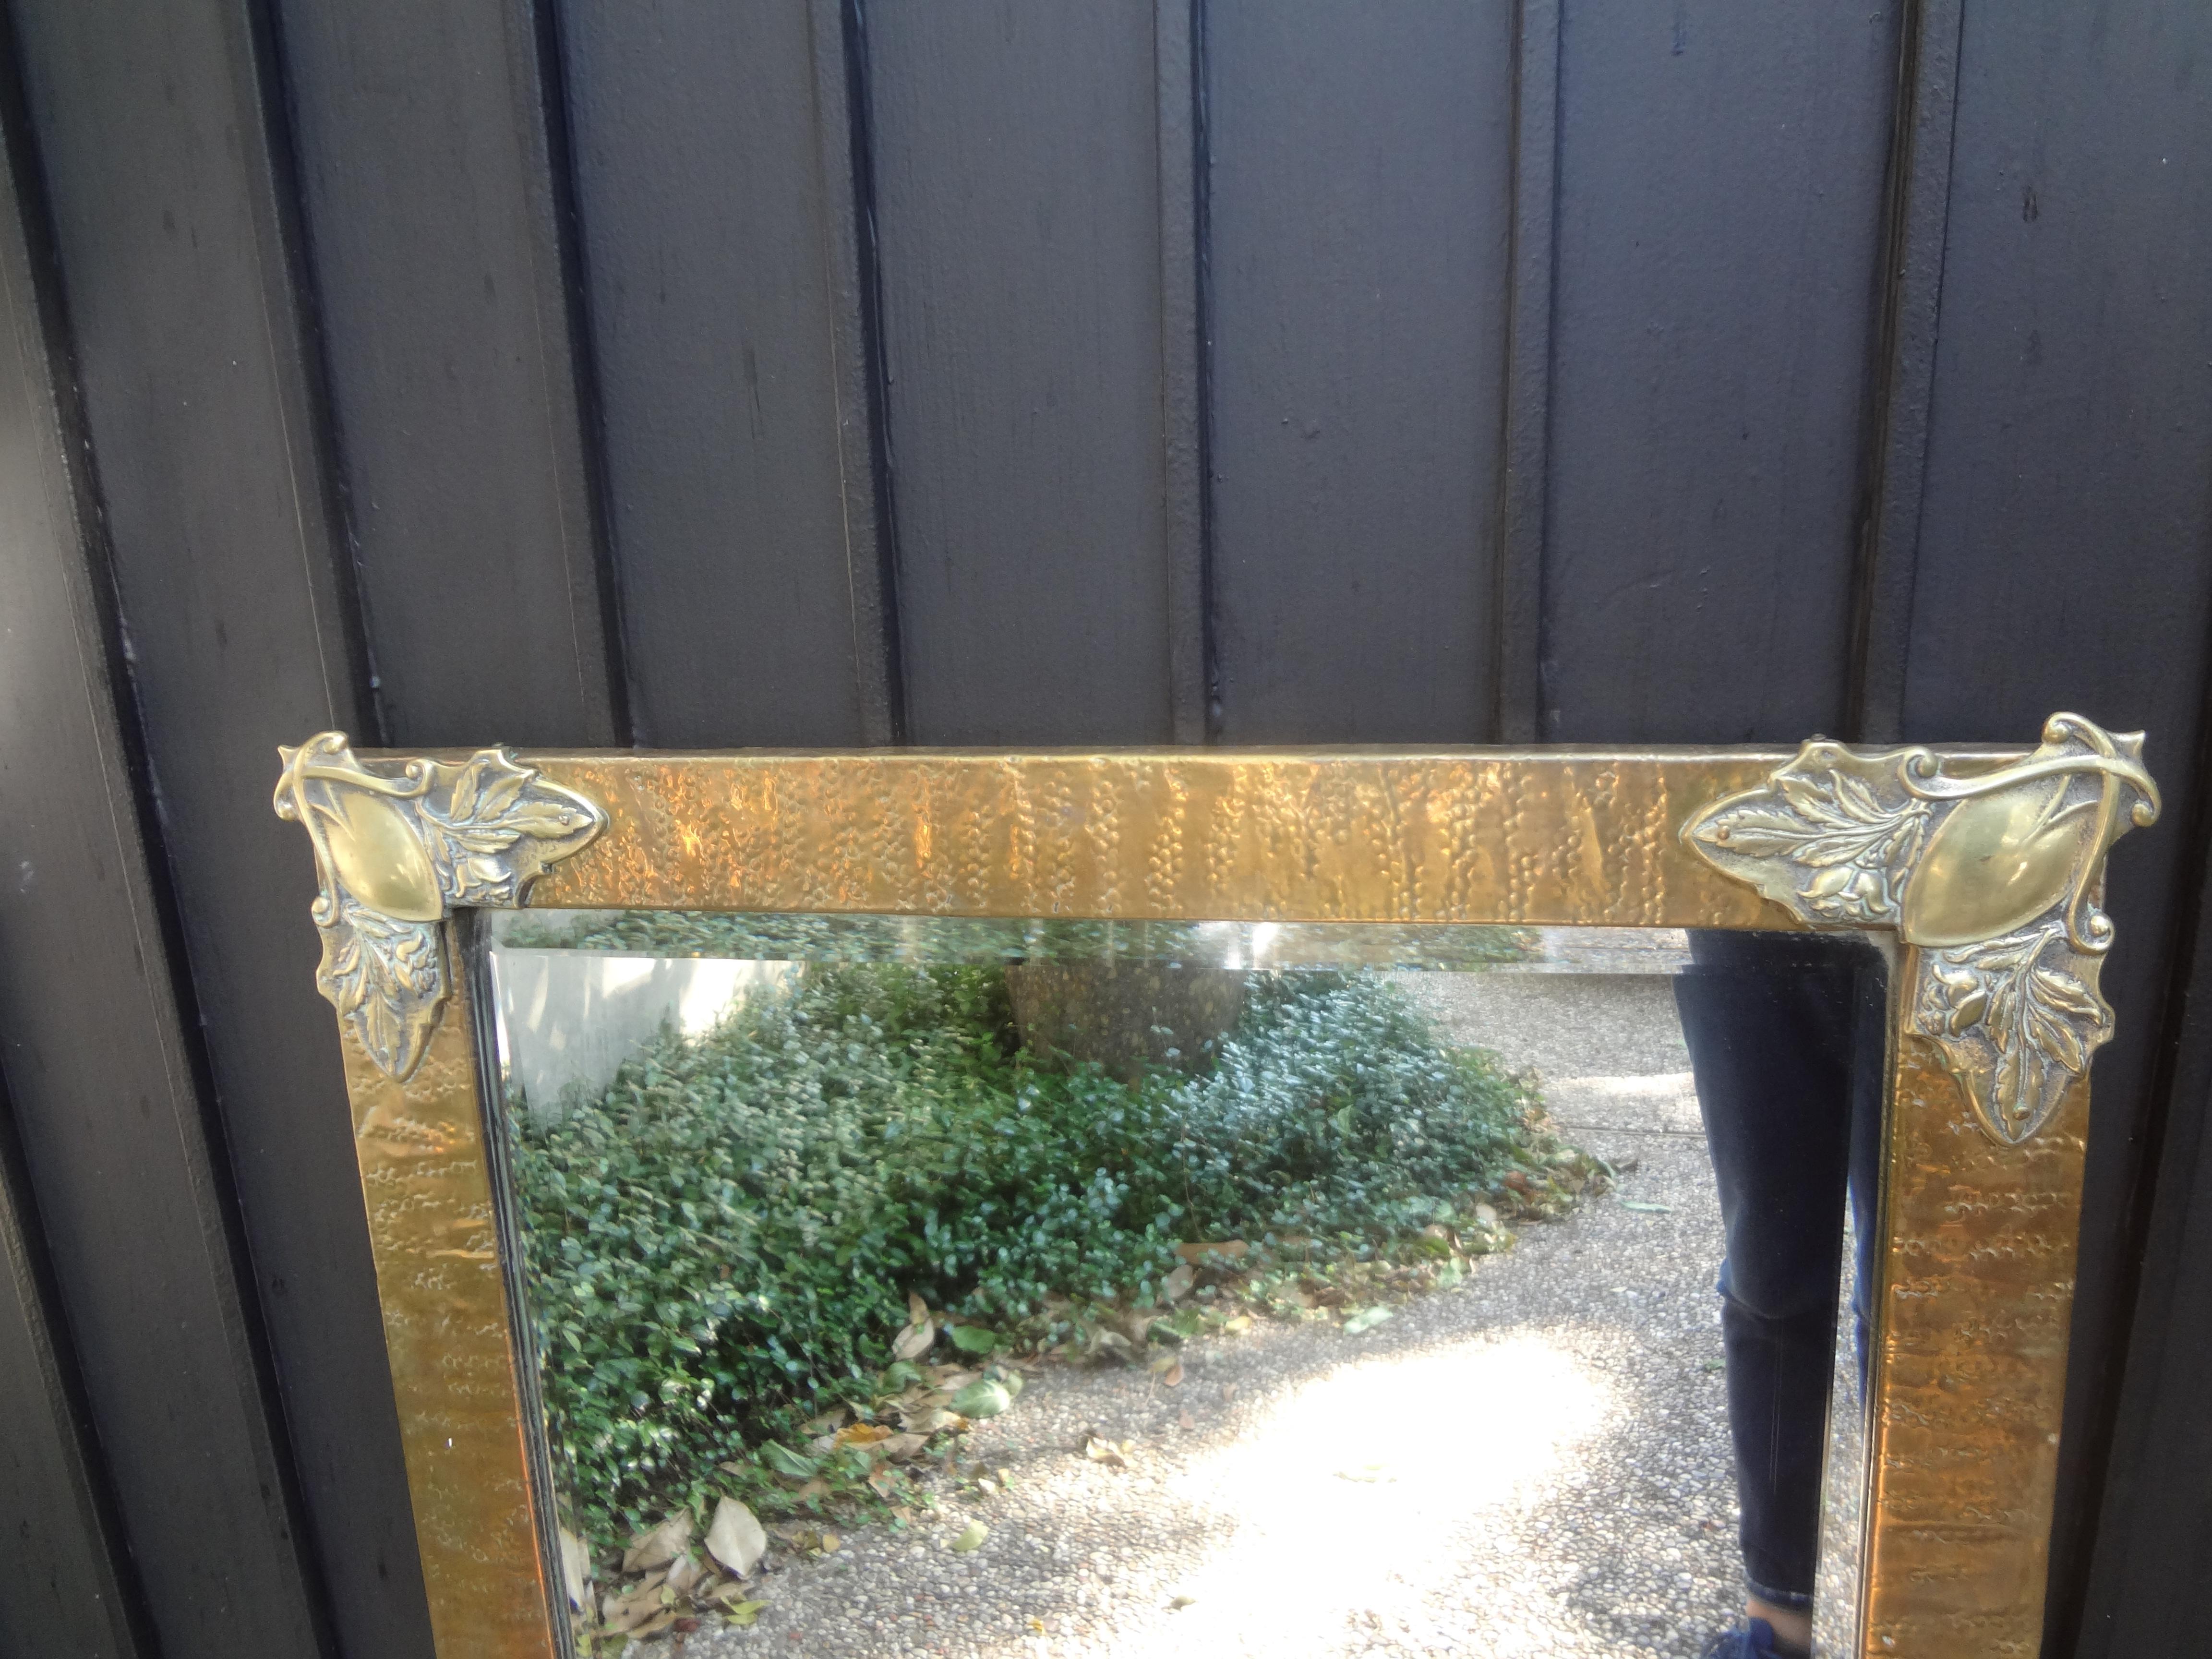 French Art Nouveau Brass Beveled Mirror.
Stunning period French Art Nouveau brass hand hammered beveled mirror with beautifully decorated corner appliques. This lovely beveled mirror can be displayed in either vertically or horizontally. Very well